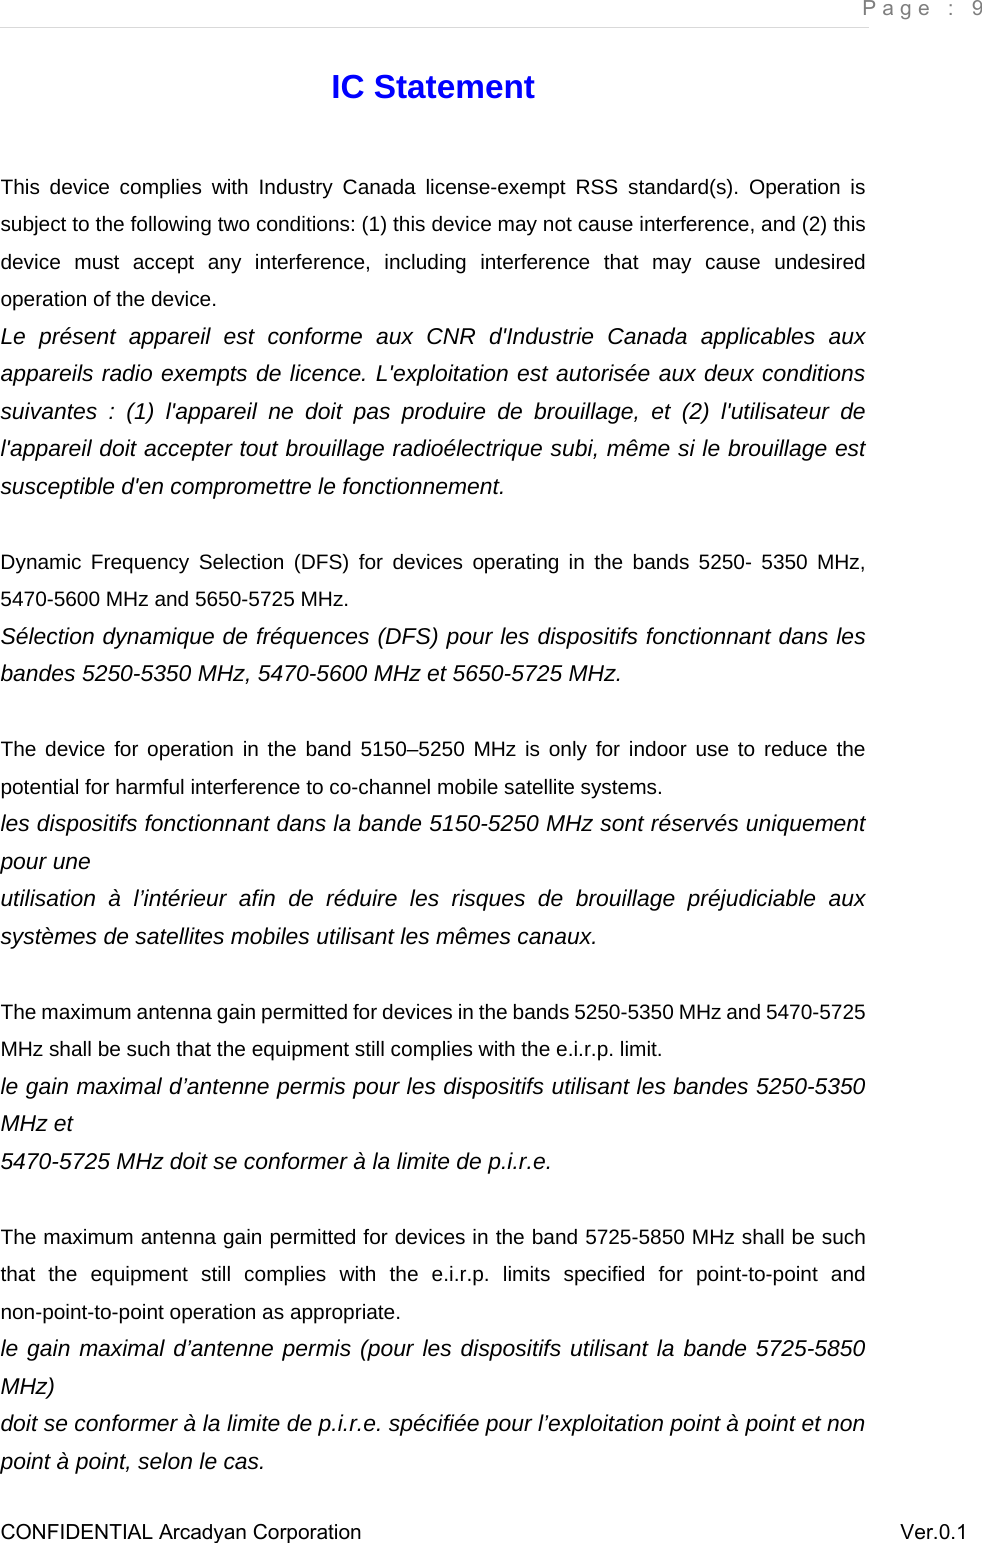     Page : 9 CONFIDENTIAL Arcadyan Corporation          Ver.0.1 IC Statement This device complies with Industry Canada license-exempt RSS standard(s). Operation is subject to the following two conditions: (1) this device may not cause interference, and (2) this device must accept any interference, including interference that may cause undesired operation of the device. Le présent appareil est conforme aux CNR d&apos;Industrie Canada applicables aux appareils radio exempts de licence. L&apos;exploitation est autorisée aux deux conditions suivantes : (1) l&apos;appareil ne doit pas produire de brouillage, et (2) l&apos;utilisateur de l&apos;appareil doit accepter tout brouillage radioélectrique subi, même si le brouillage est susceptible d&apos;en compromettre le fonctionnement.  Dynamic Frequency Selection (DFS) for devices operating in the bands 5250- 5350 MHz, 5470-5600 MHz and 5650-5725 MHz. Sélection dynamique de fréquences (DFS) pour les dispositifs fonctionnant dans les bandes 5250-5350 MHz, 5470-5600 MHz et 5650-5725 MHz.  The device for operation in the band 5150–5250 MHz is only for indoor use to reduce the potential for harmful interference to co-channel mobile satellite systems. les dispositifs fonctionnant dans la bande 5150-5250 MHz sont réservés uniquement pour une utilisation à l’intérieur afin de réduire les risques de brouillage préjudiciable aux systèmes de satellites mobiles utilisant les mêmes canaux.  The maximum antenna gain permitted for devices in the bands 5250-5350 MHz and 5470-5725 MHz shall be such that the equipment still complies with the e.i.r.p. limit. le gain maximal d’antenne permis pour les dispositifs utilisant les bandes 5250-5350 MHz et 5470-5725 MHz doit se conformer à la limite de p.i.r.e.  The maximum antenna gain permitted for devices in the band 5725-5850 MHz shall be such that the equipment still complies with the e.i.r.p. limits specified for point-to-point and non-point-to-point operation as appropriate. le gain maximal d’antenne permis (pour les dispositifs utilisant la bande 5725-5850 MHz) doit se conformer à la limite de p.i.r.e. spécifiée pour l’exploitation point à point et non point à point, selon le cas. 